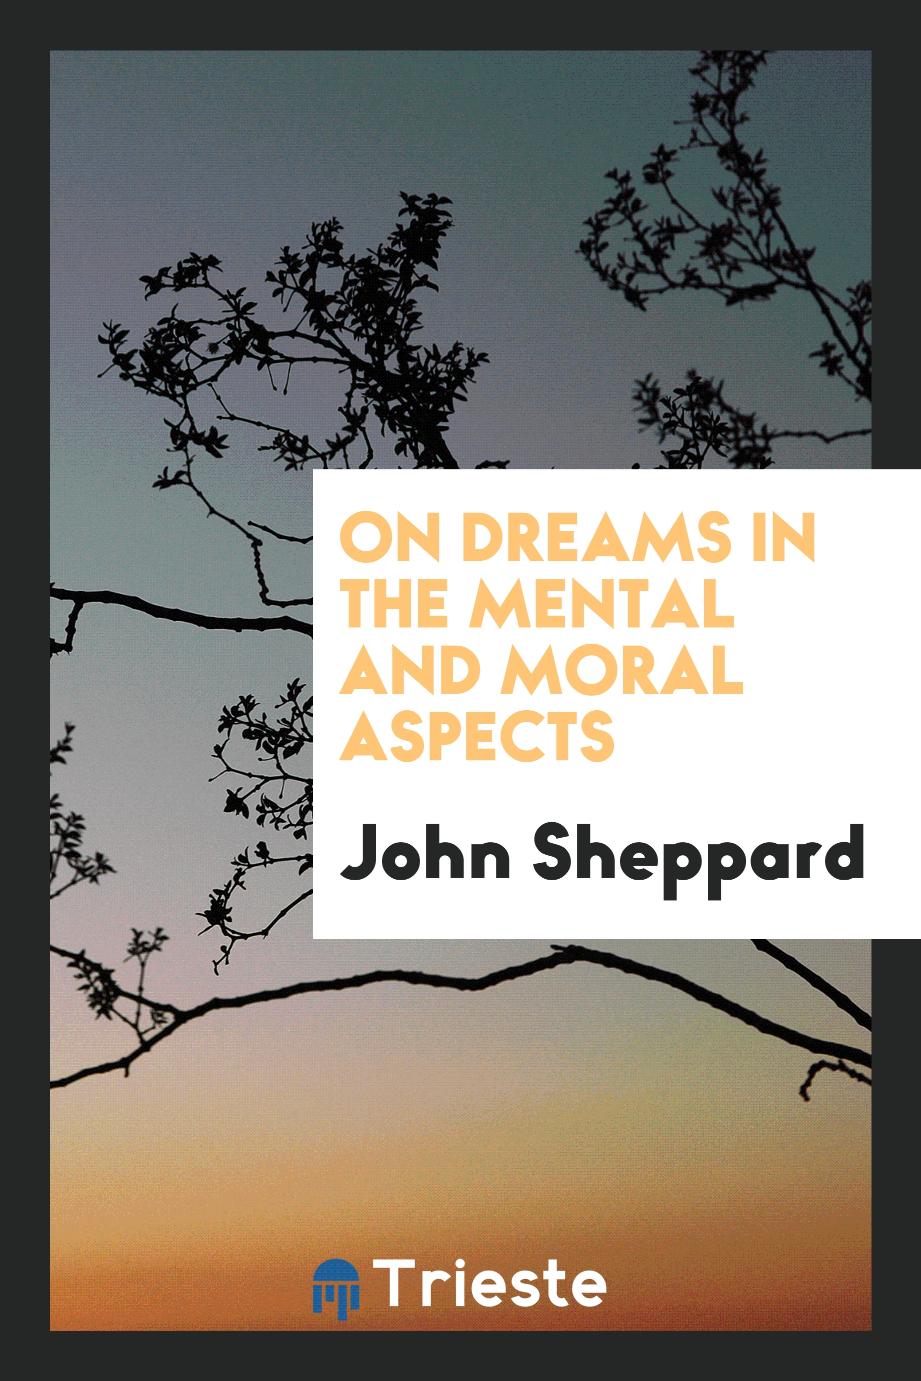 John Sheppard - On dreams in the mental and moral aspects